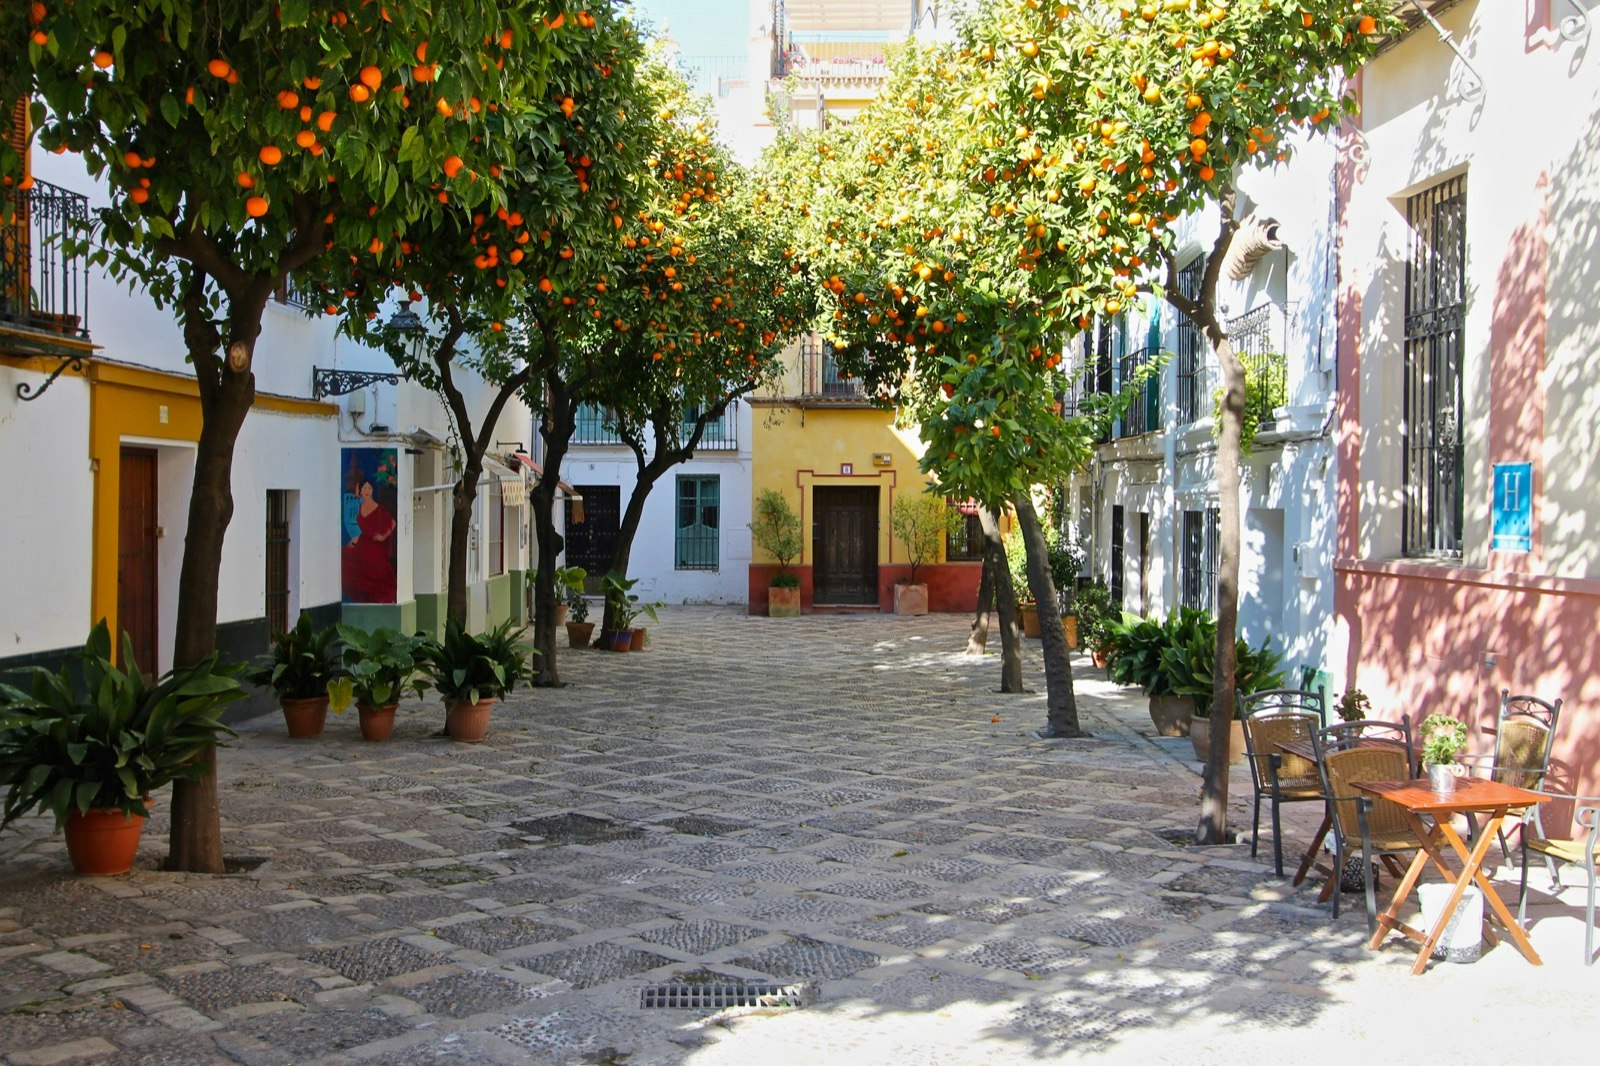 Narrow alleyway lined with orange trees and bistro tables